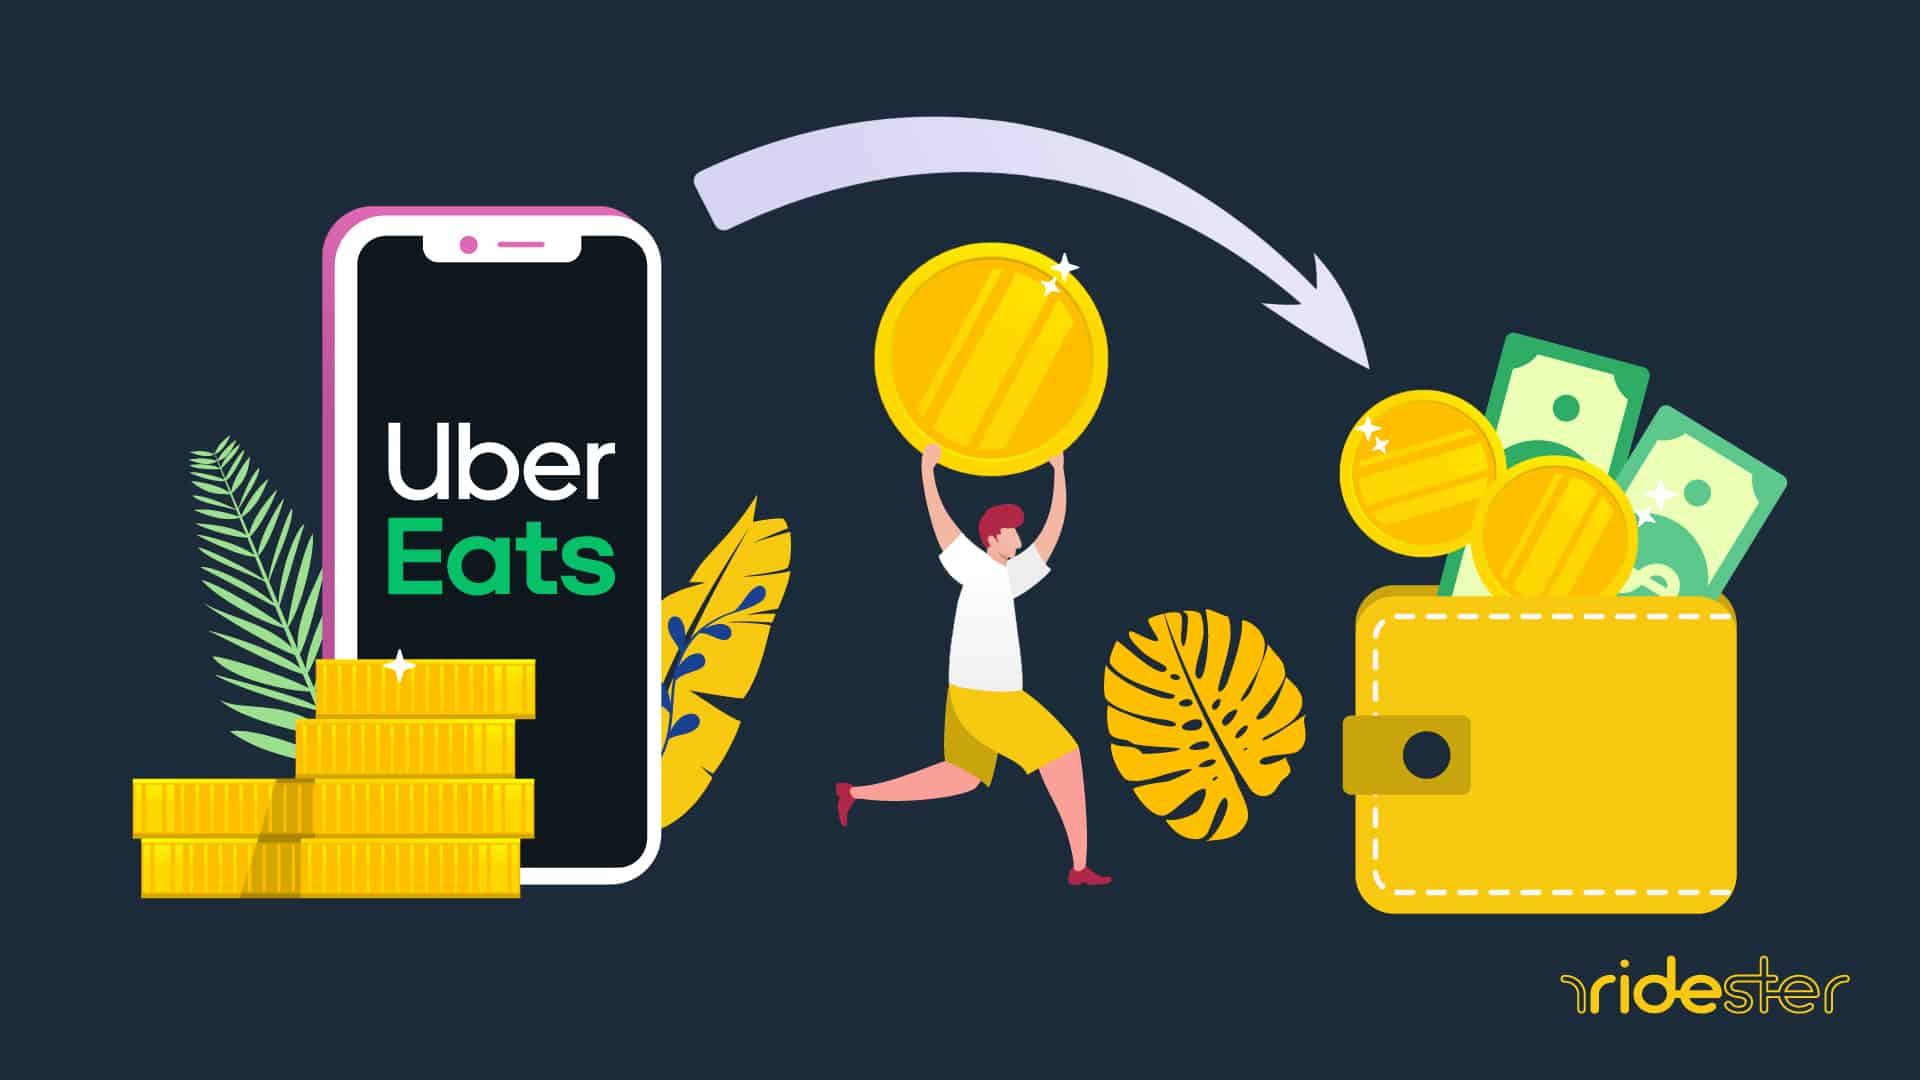 image for how to cancel uber eats order post showing money going from a mobile phone with the uber eats logo on the screen into a wallet